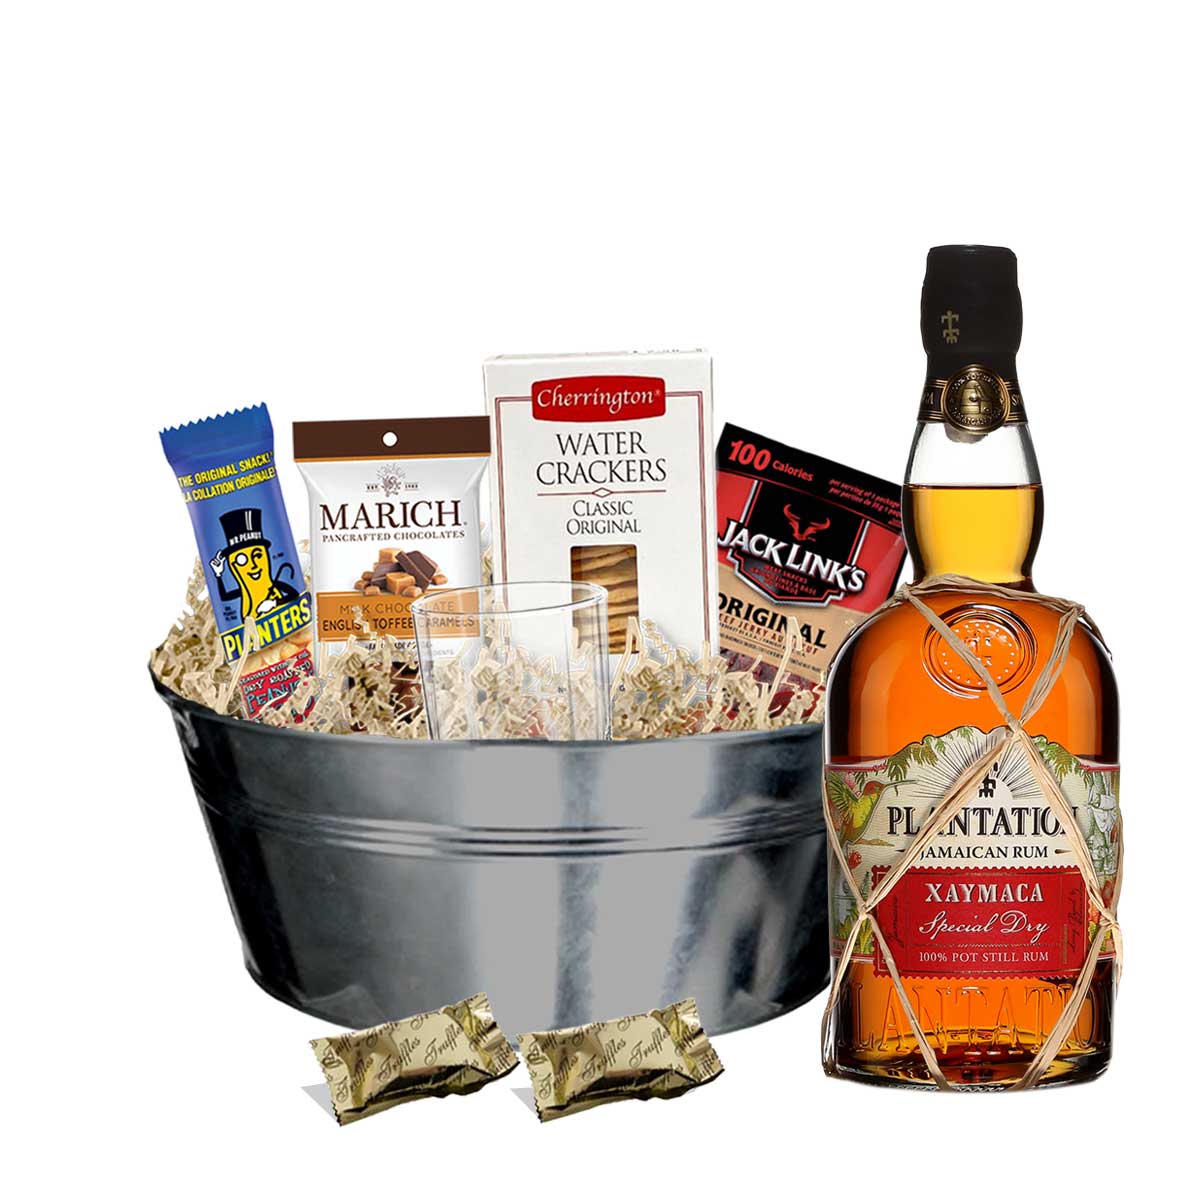 TAG Liquor Stores BC - Plantation Xaymaca Special Dry Rum 750ml Gift Basket